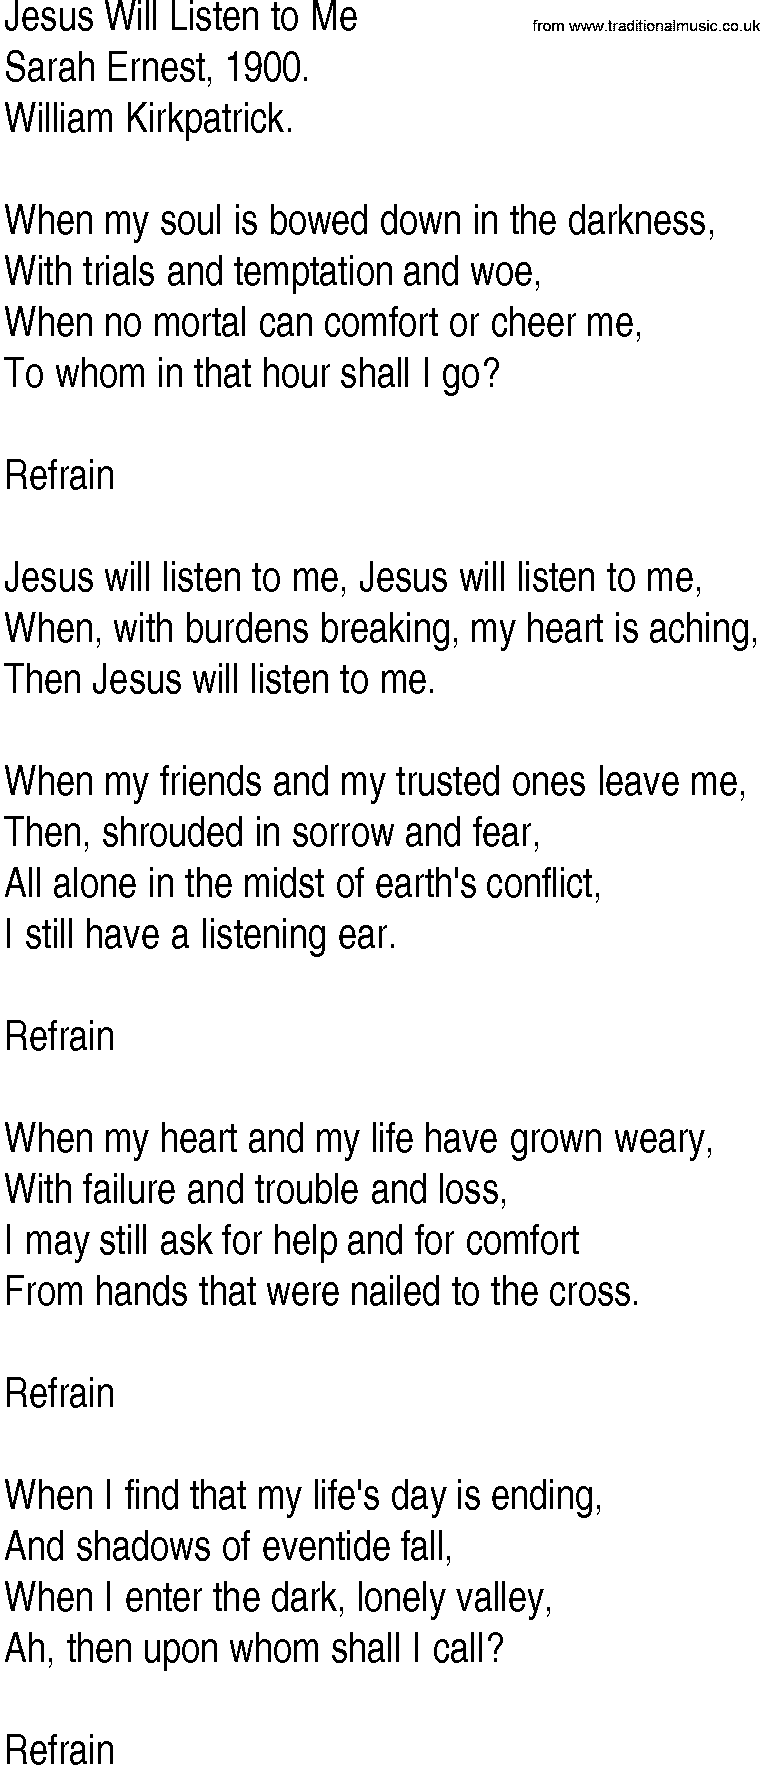 Hymn and Gospel Song: Jesus Will Listen to Me by Sarah Ernest lyrics